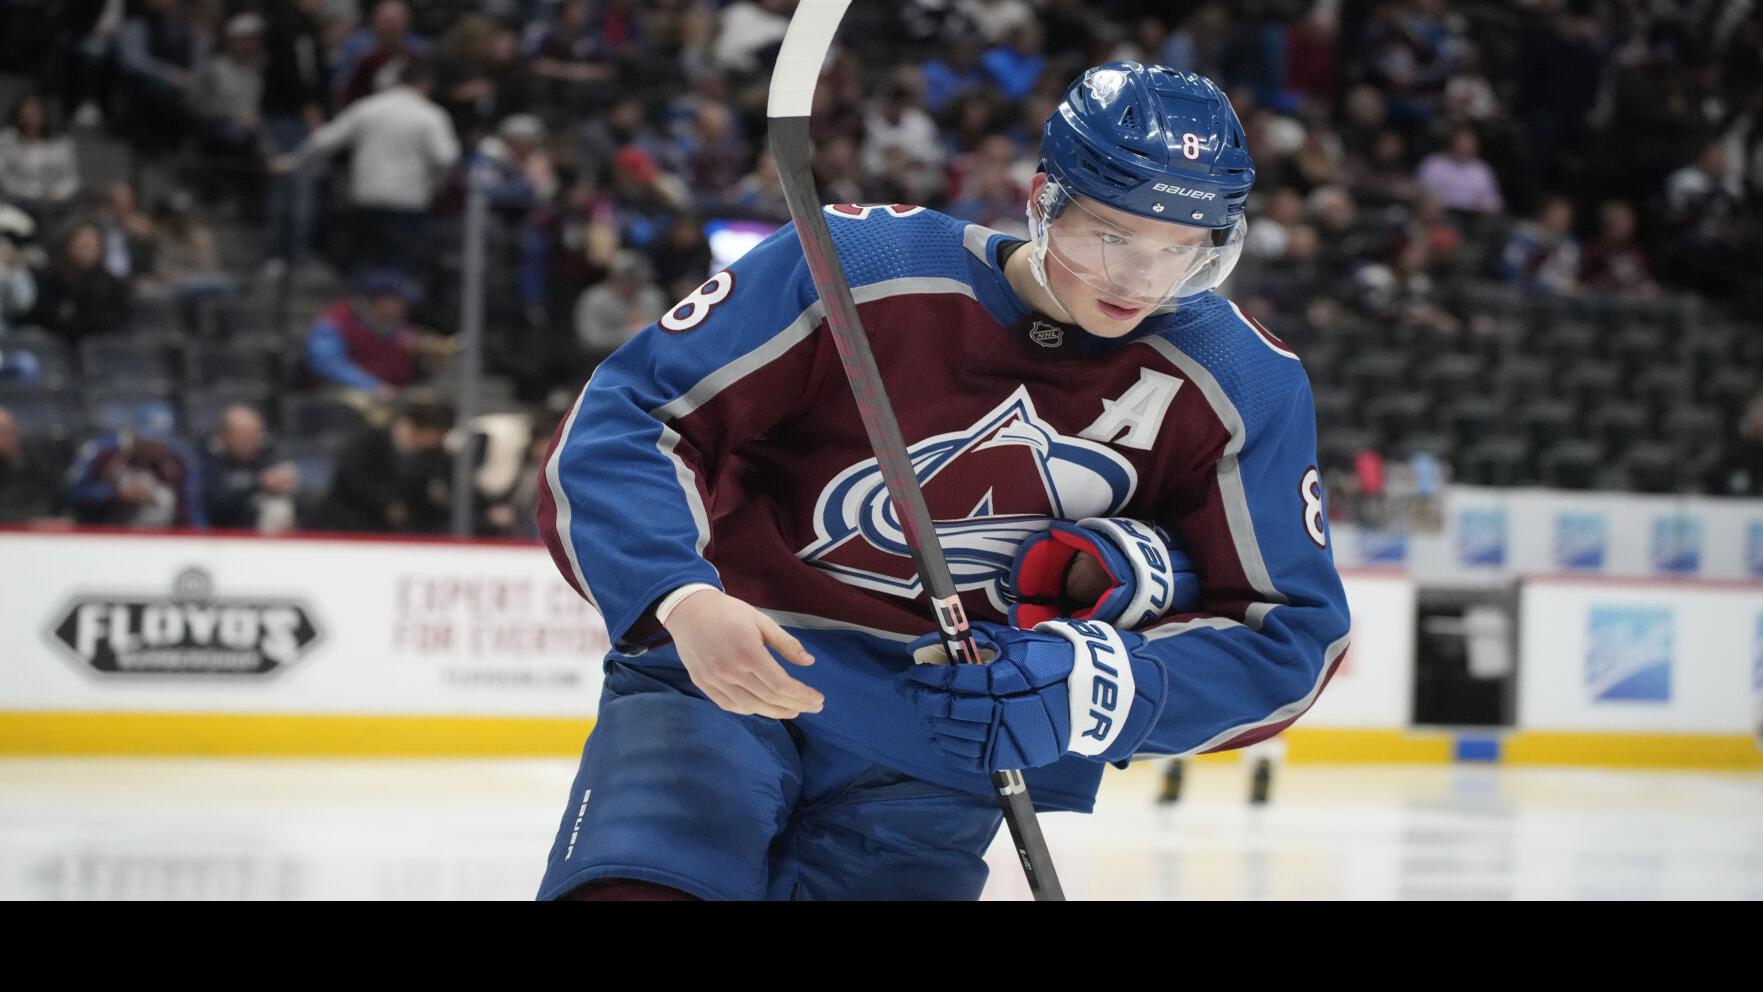 DNVR Bets Daily: Our sports bets for Cale Makar and the Colorado